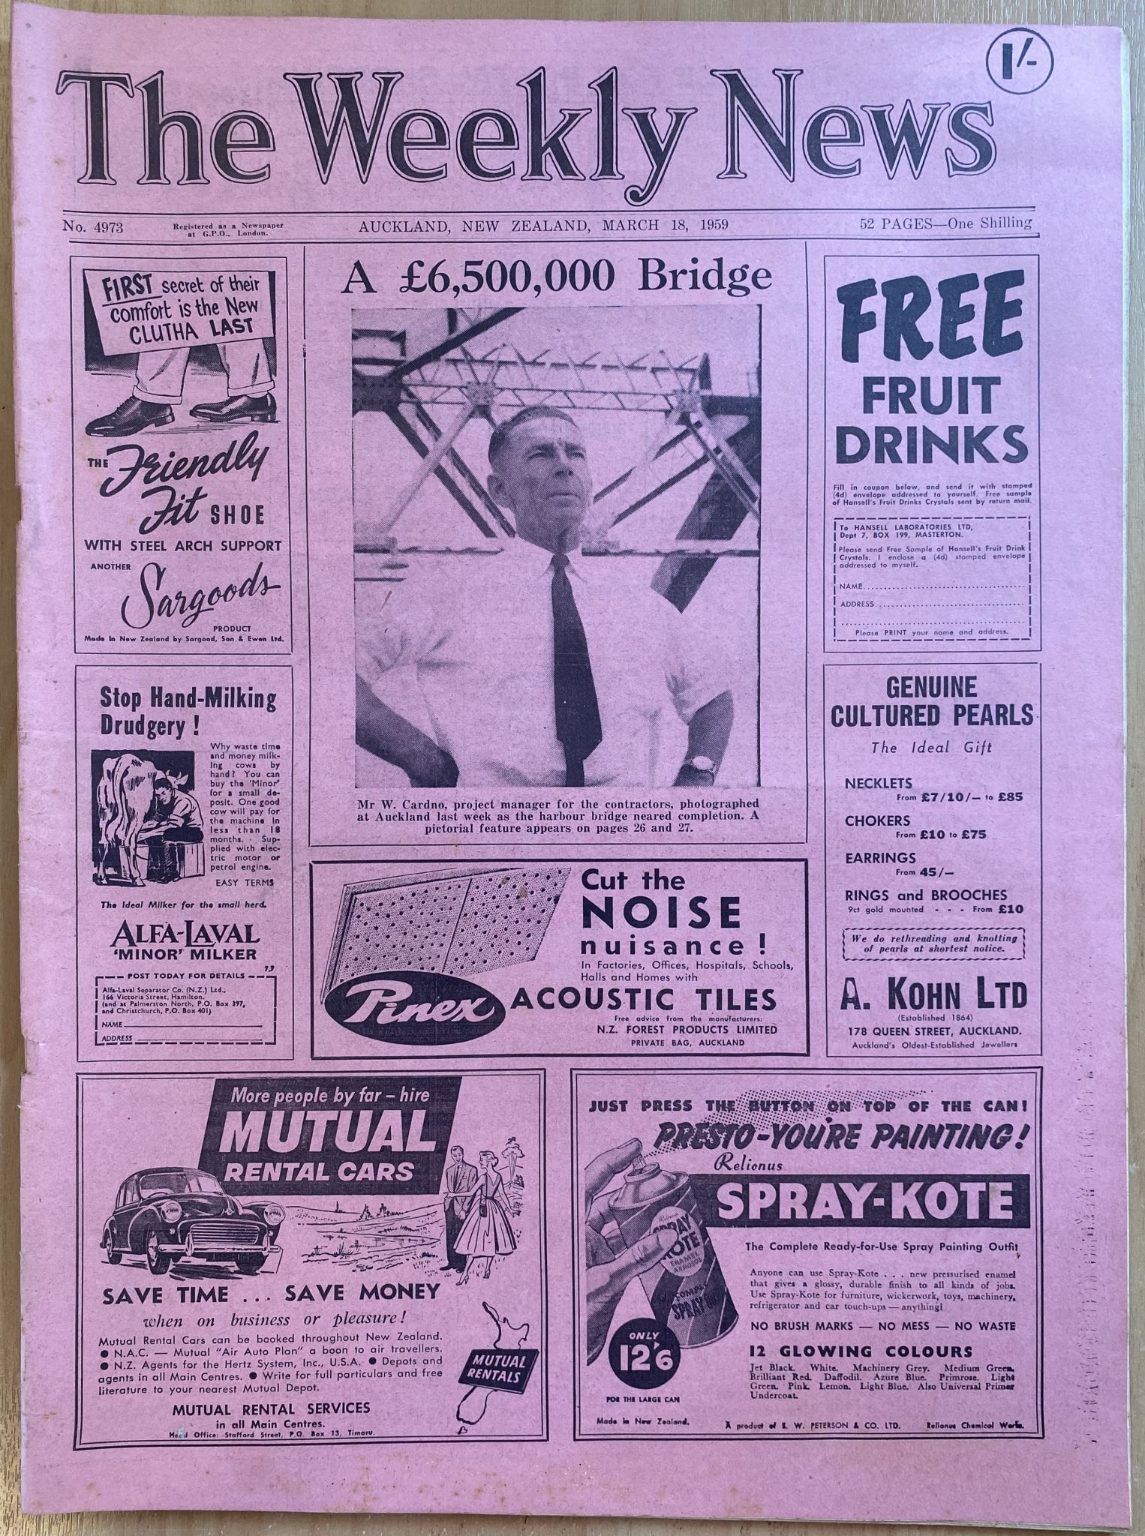 OLD NEWSPAPER: The Weekly News - No. 4973, 18 March 1959